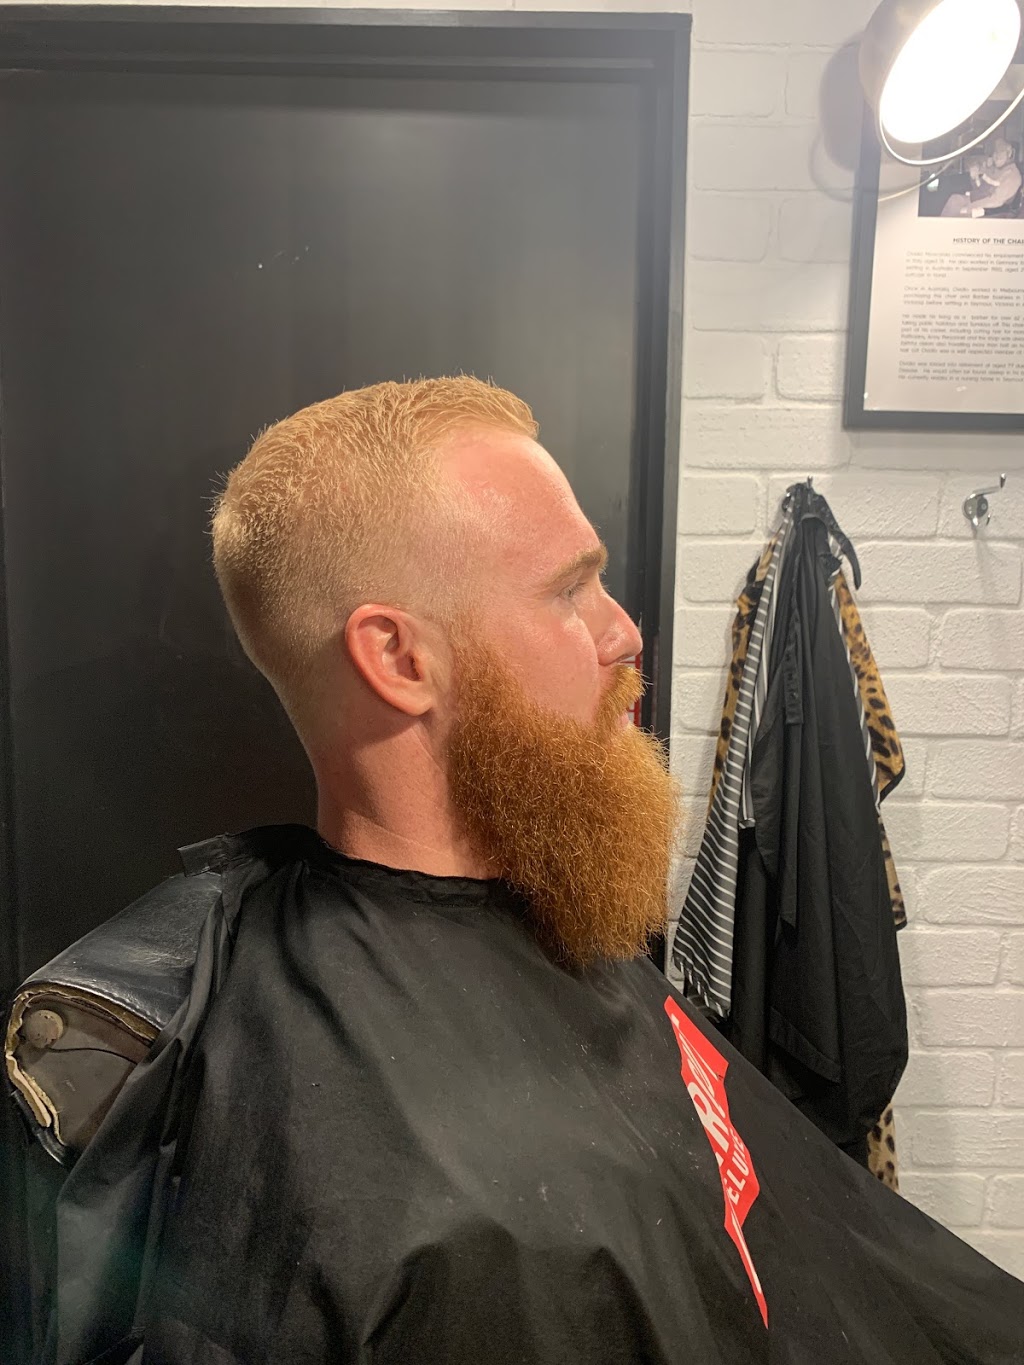 Boardriders Barbershop | hair care | Shops, 28/72 Marine Parade Inside Boardriders between Boards and 4Pines Brewery, Coolangatta QLD 4224, Australia | 0425194734 OR +61 425 194 734